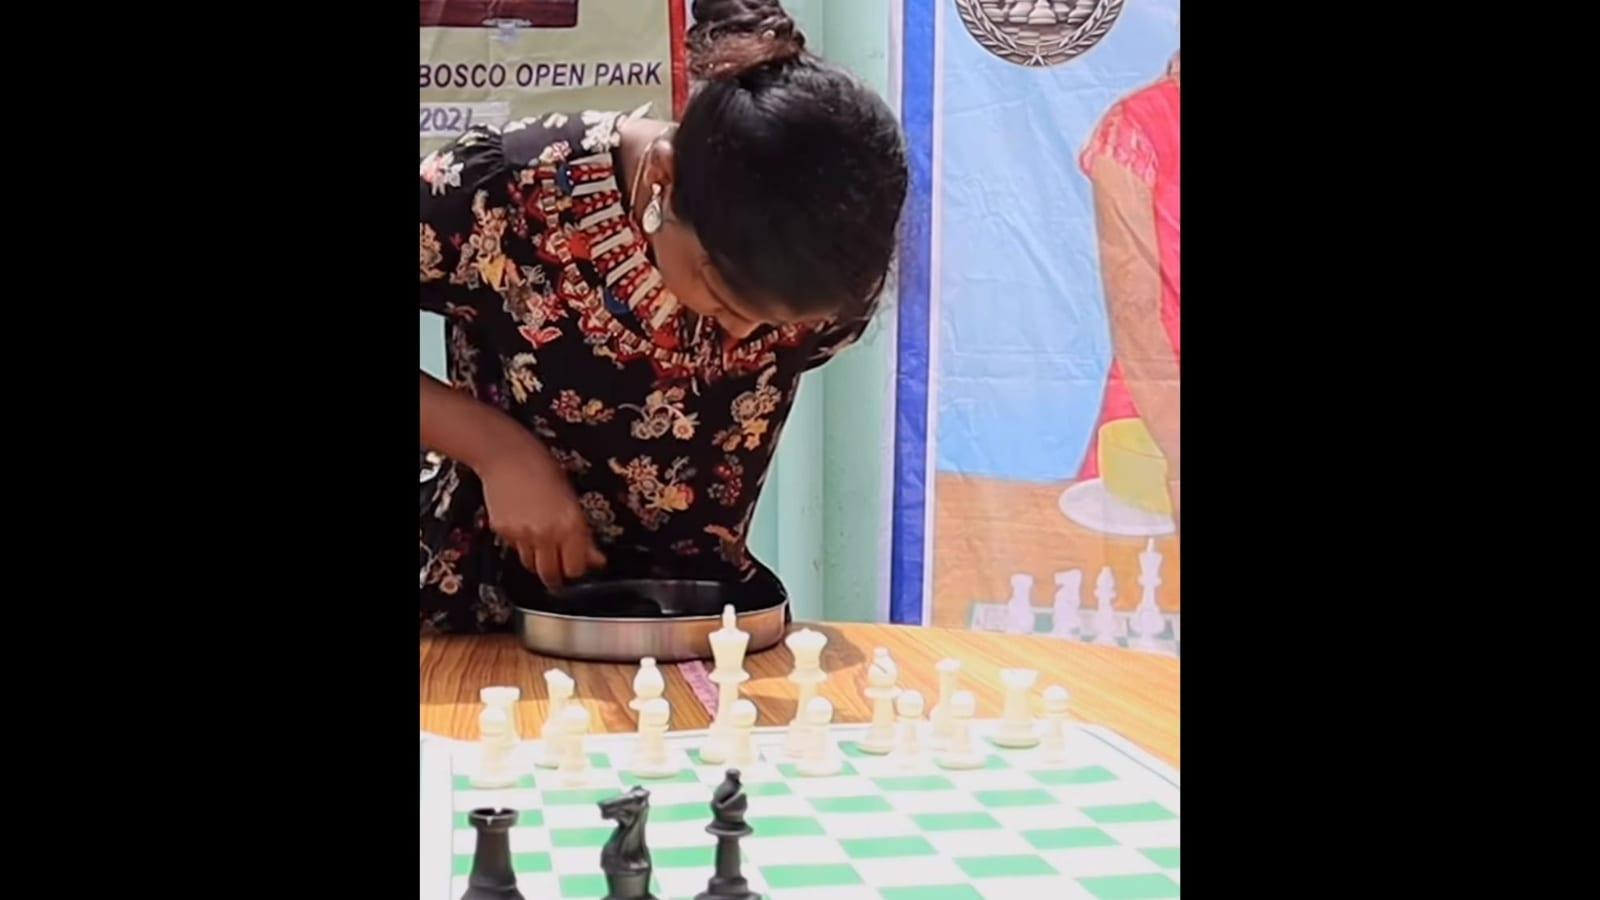 Fastest arrangement of Chess pieces by a kid 